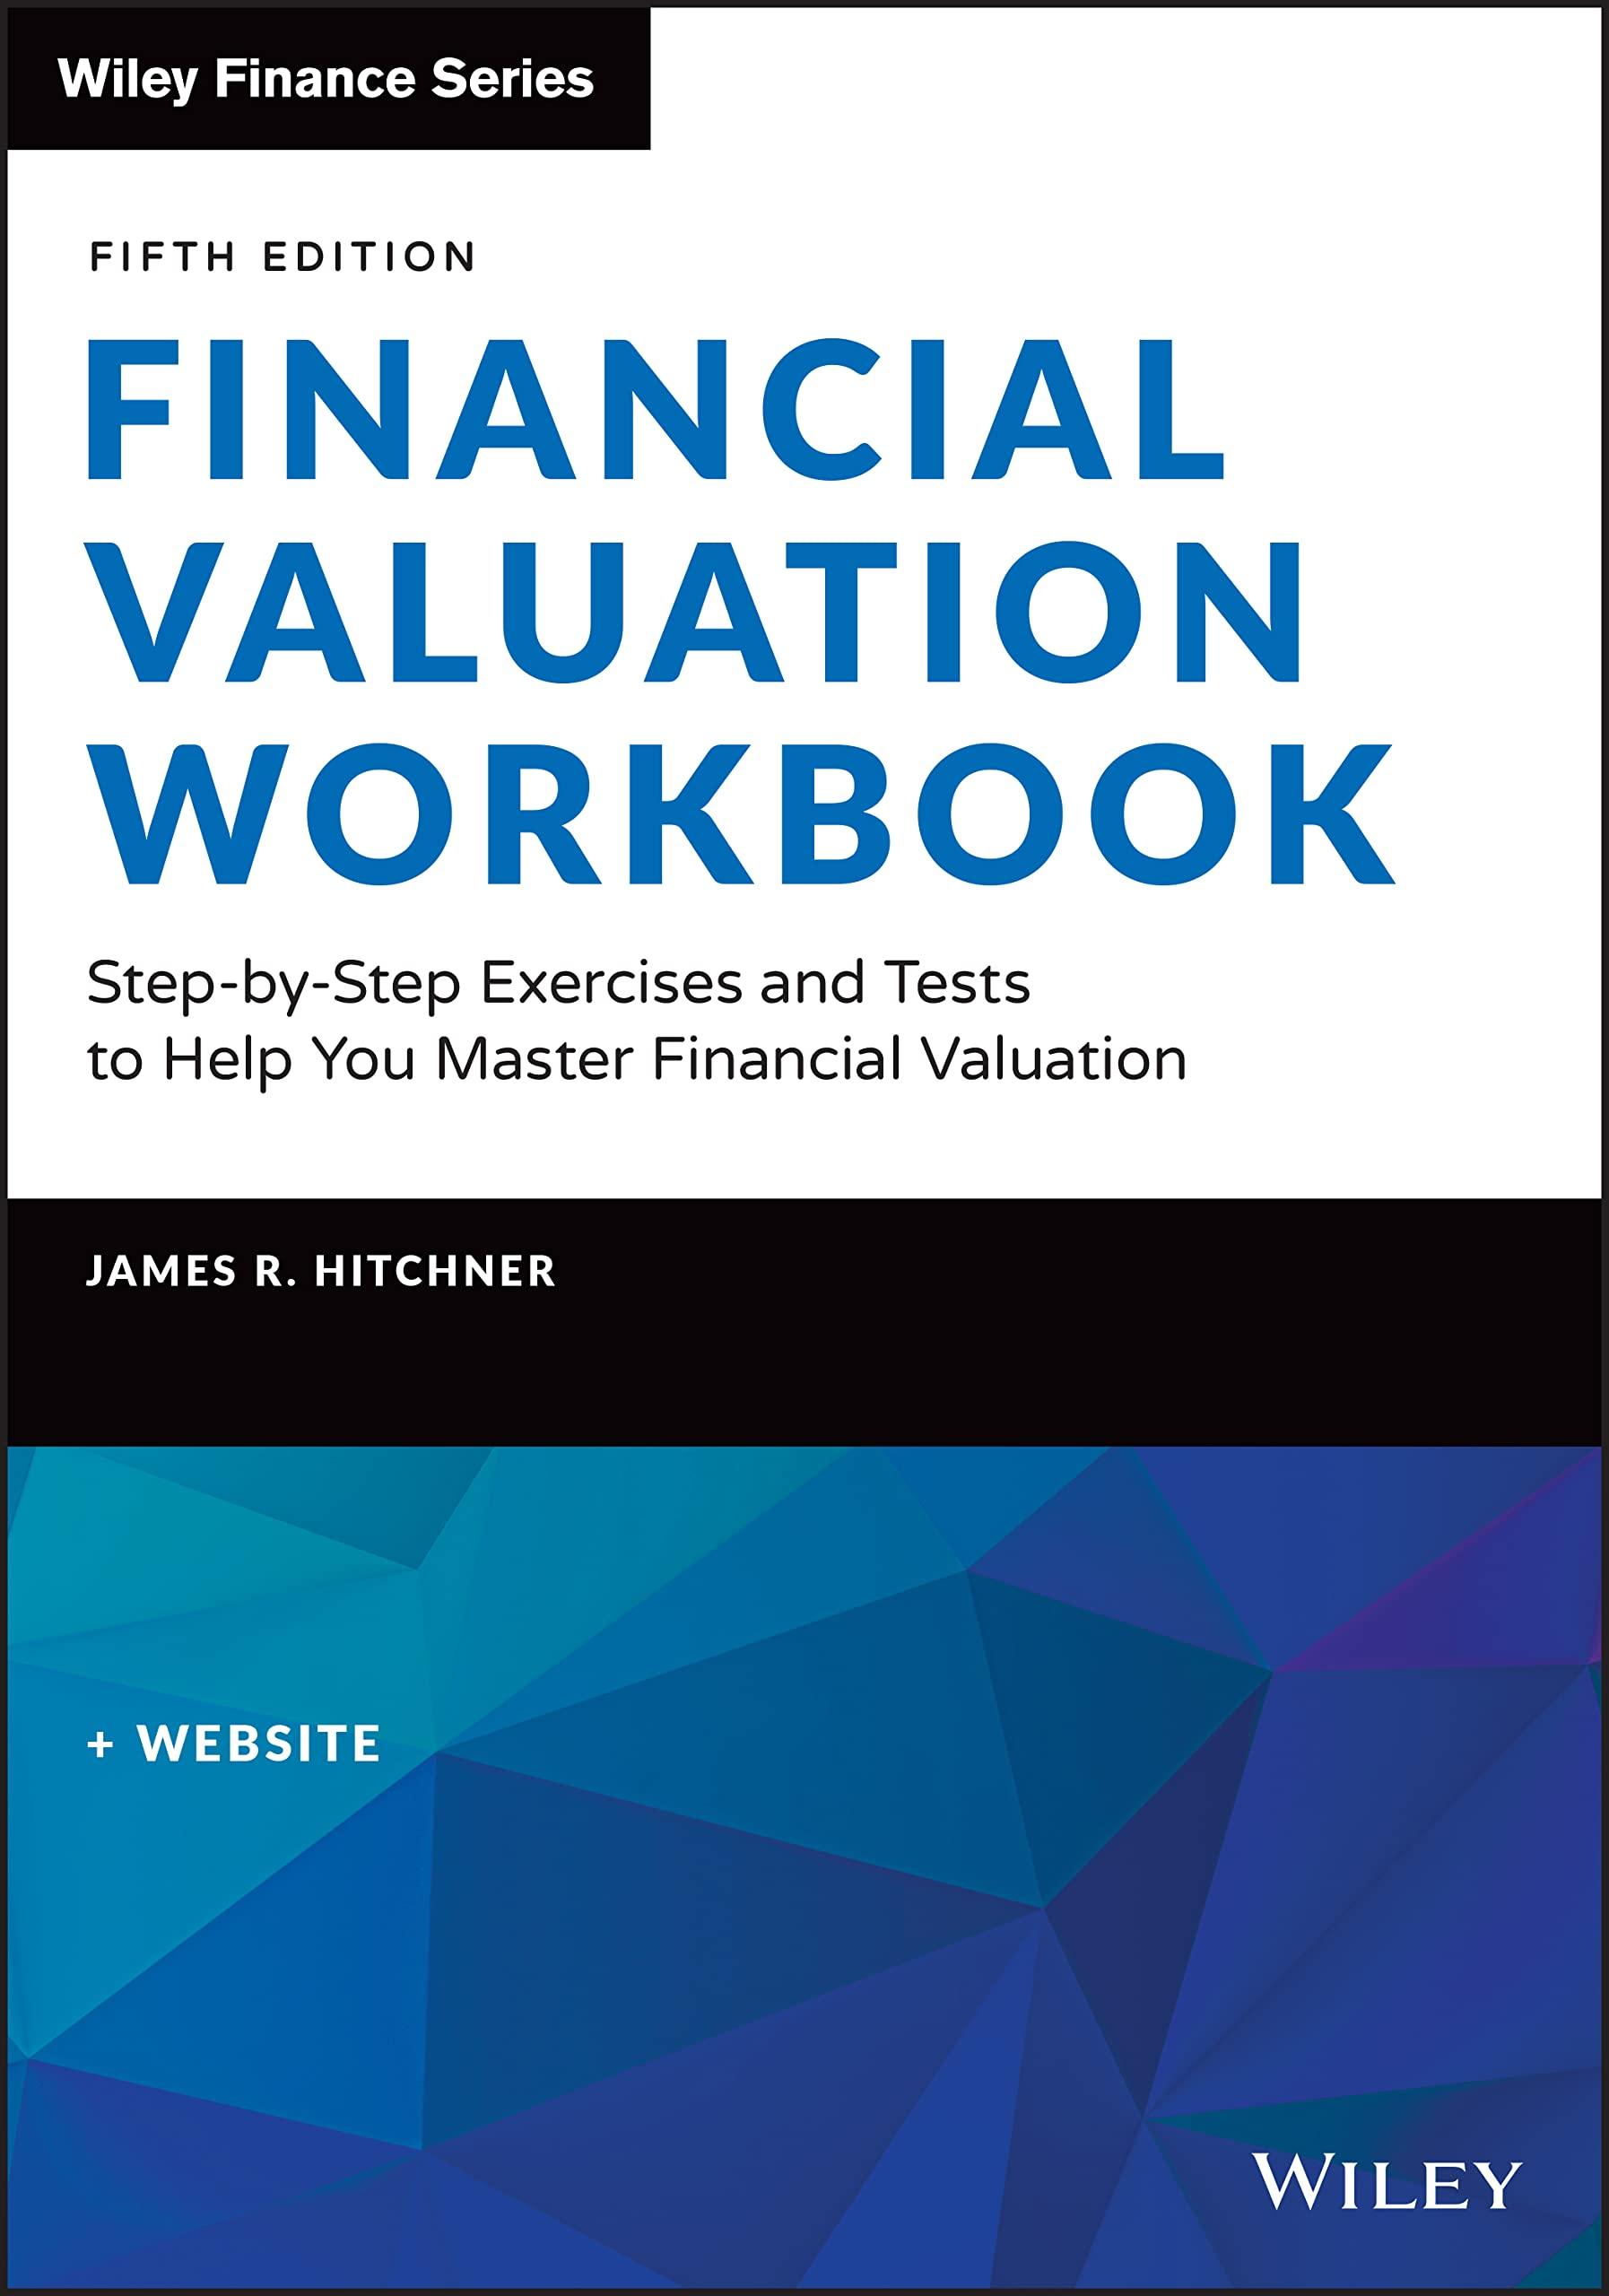 financial valuation workbook step by step exercises and tests to help you master financial valuation 5th